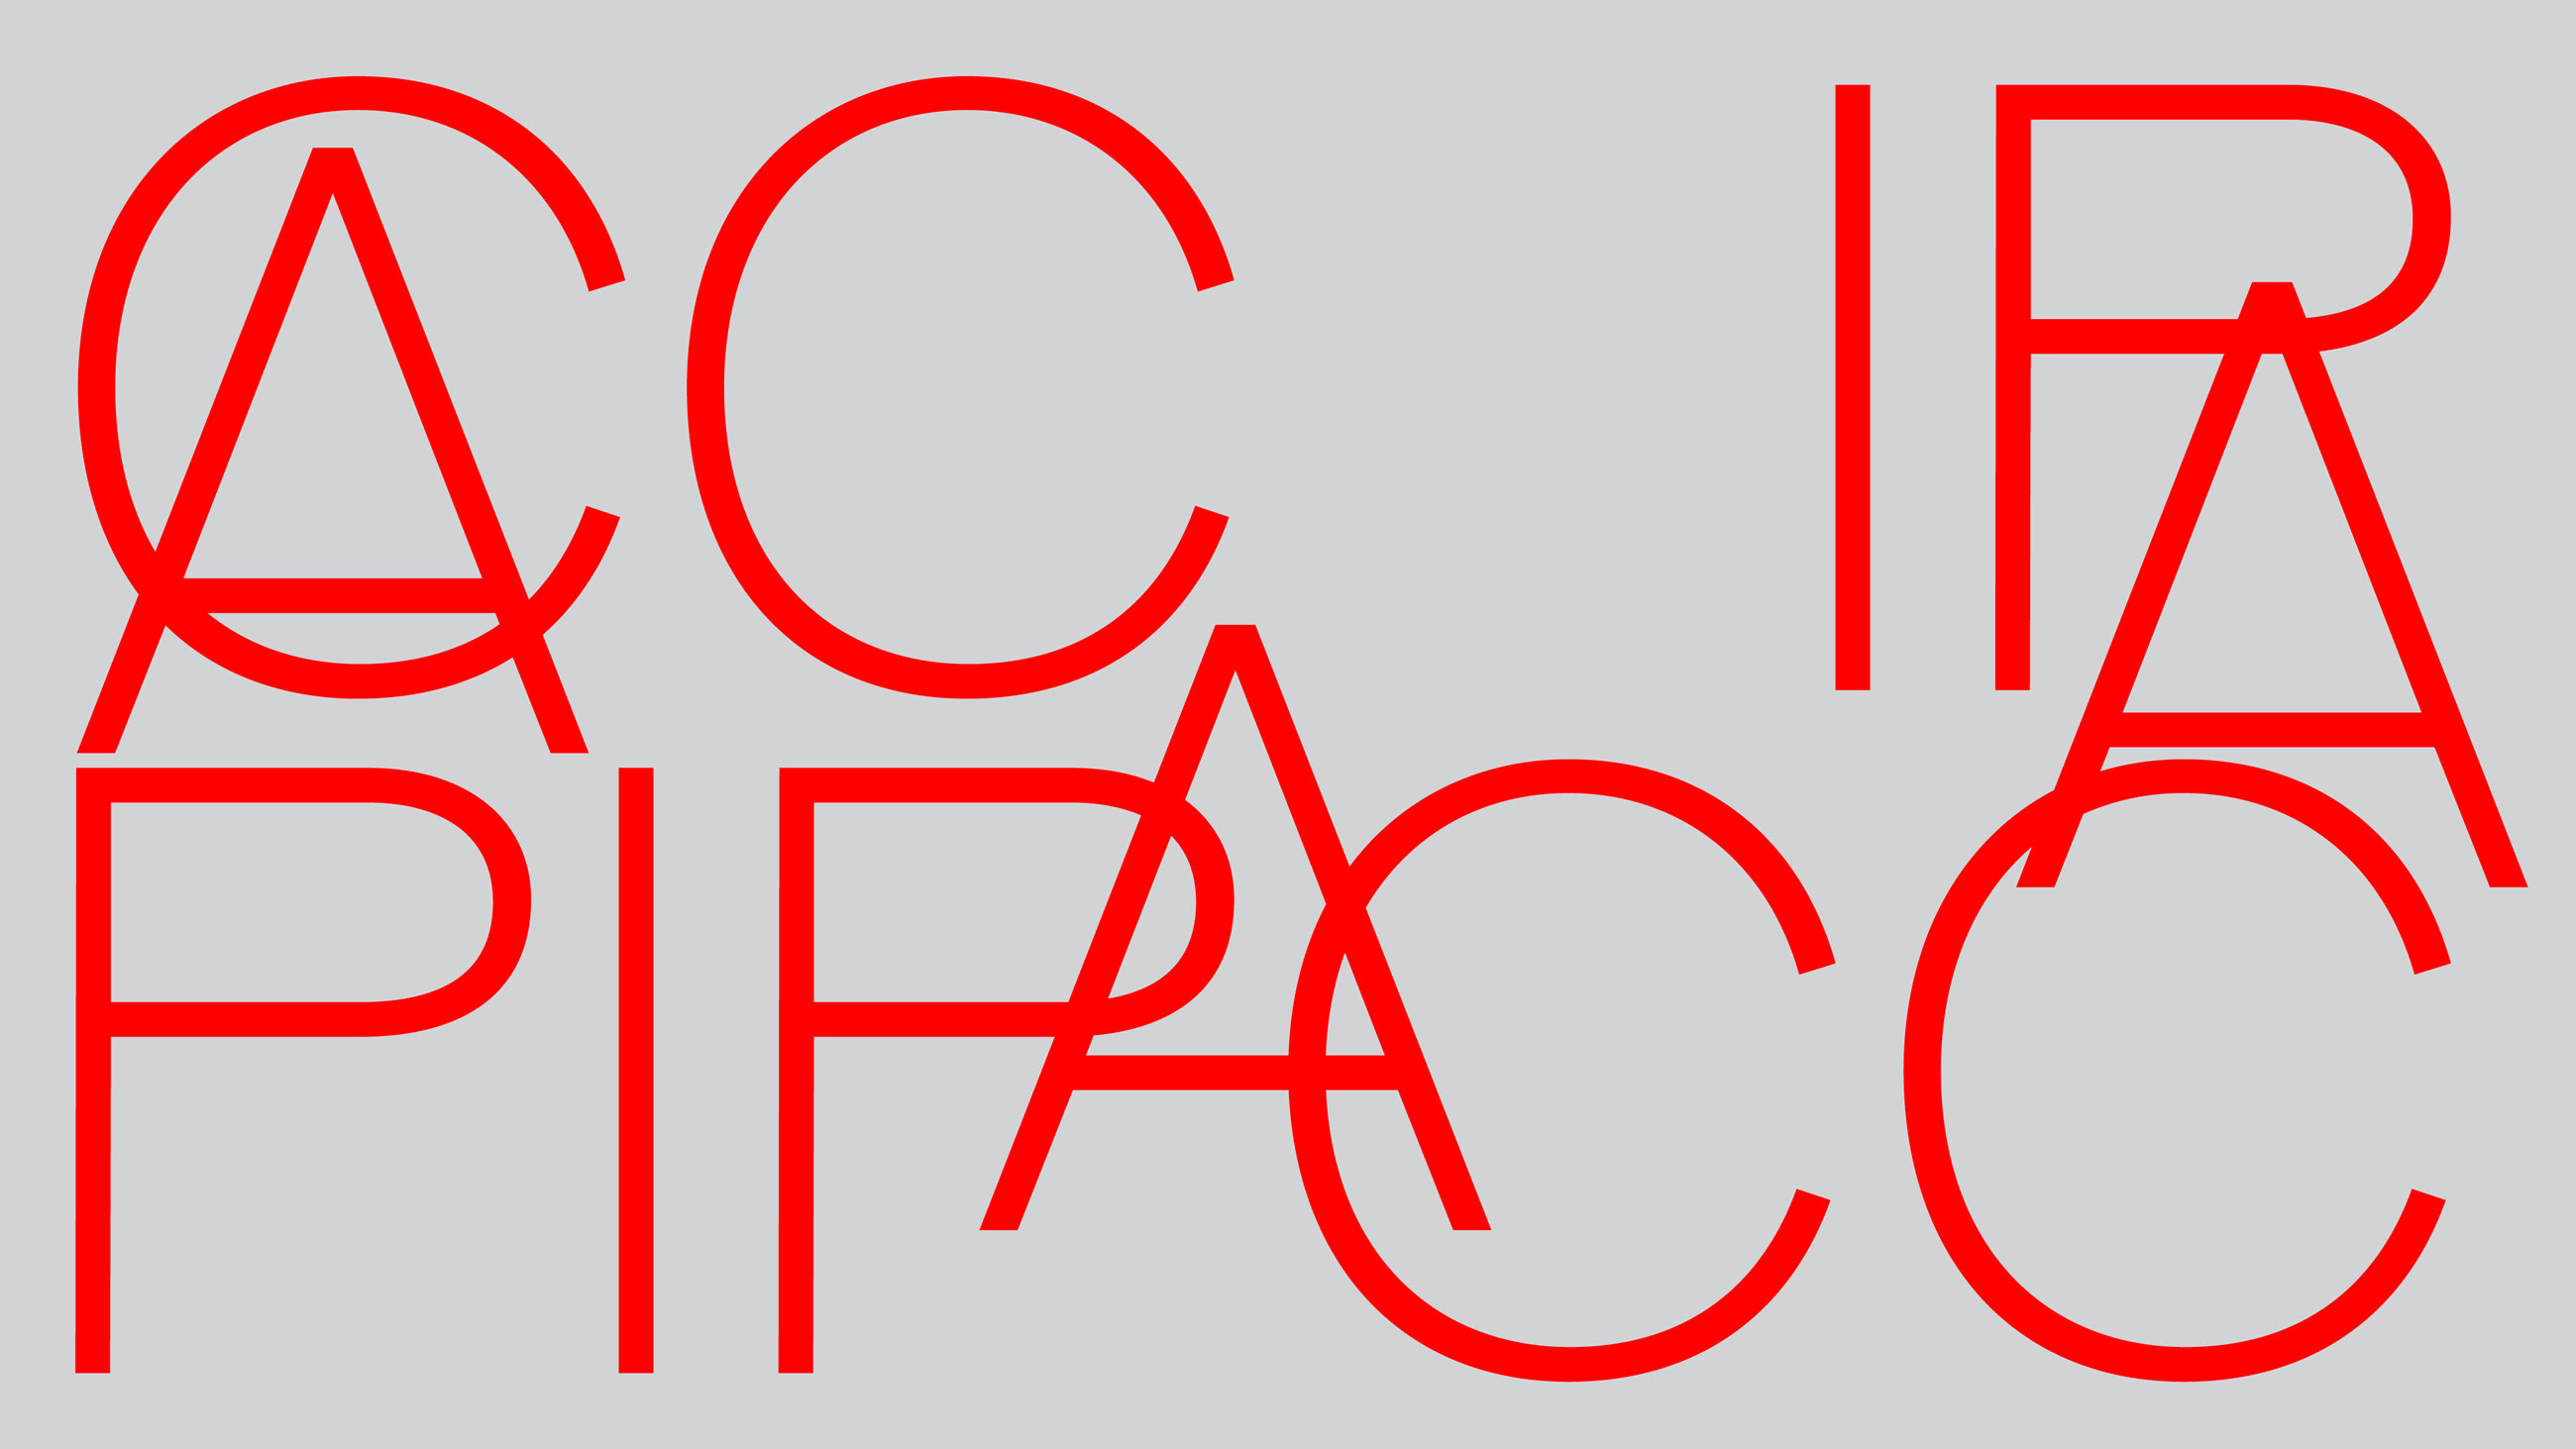 Intergovernmental Panel on Art and Climate Change, visual Identity designed by Rudy Guedj